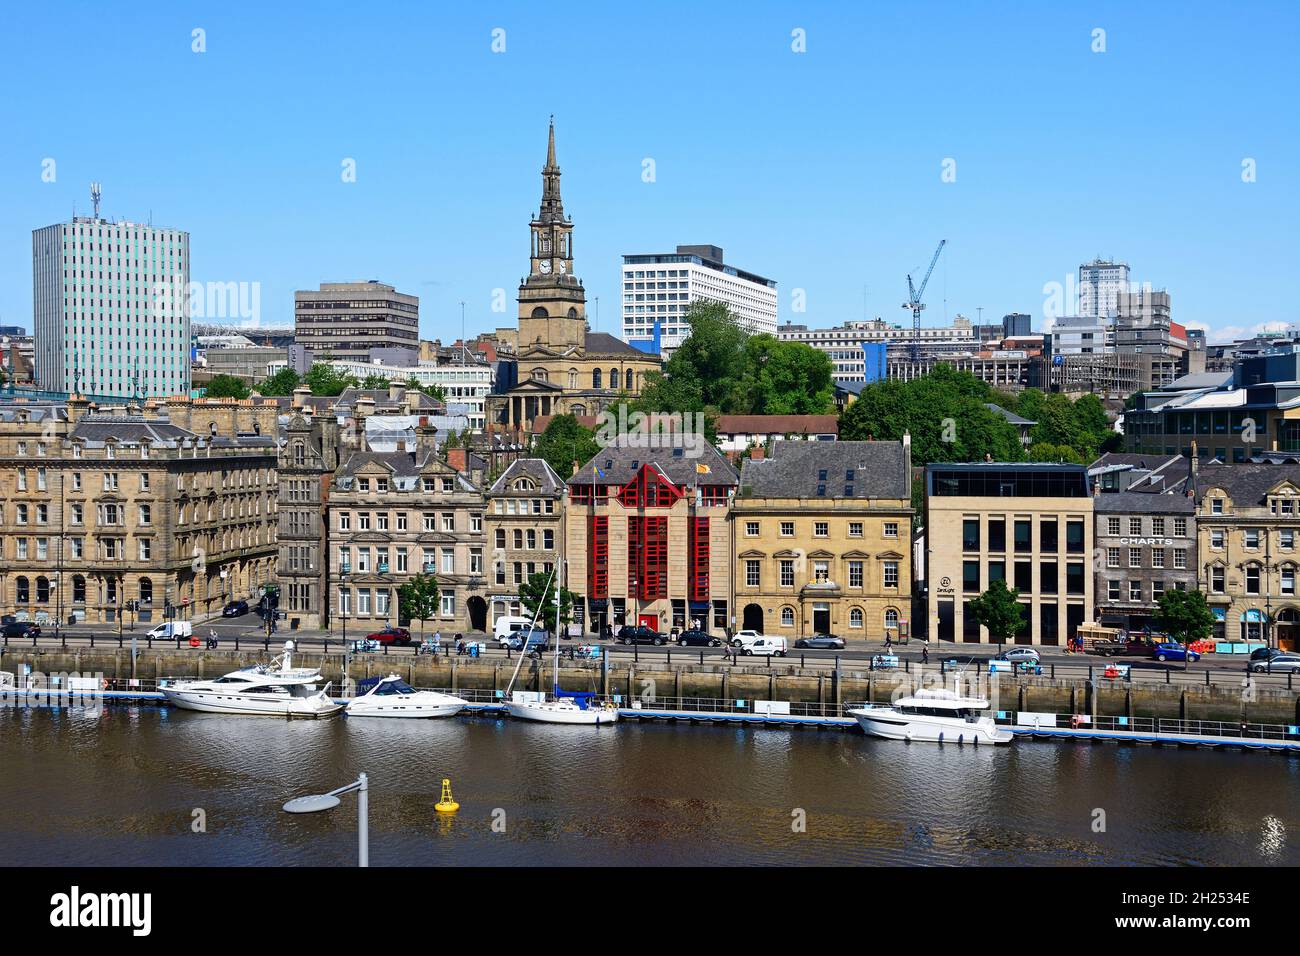 View across the River Tyne towards Newcastle upon Tyne Saint Willibrord with All Saints clock tower to the centre, Newcastle upon Tyne, UK. Stock Photo